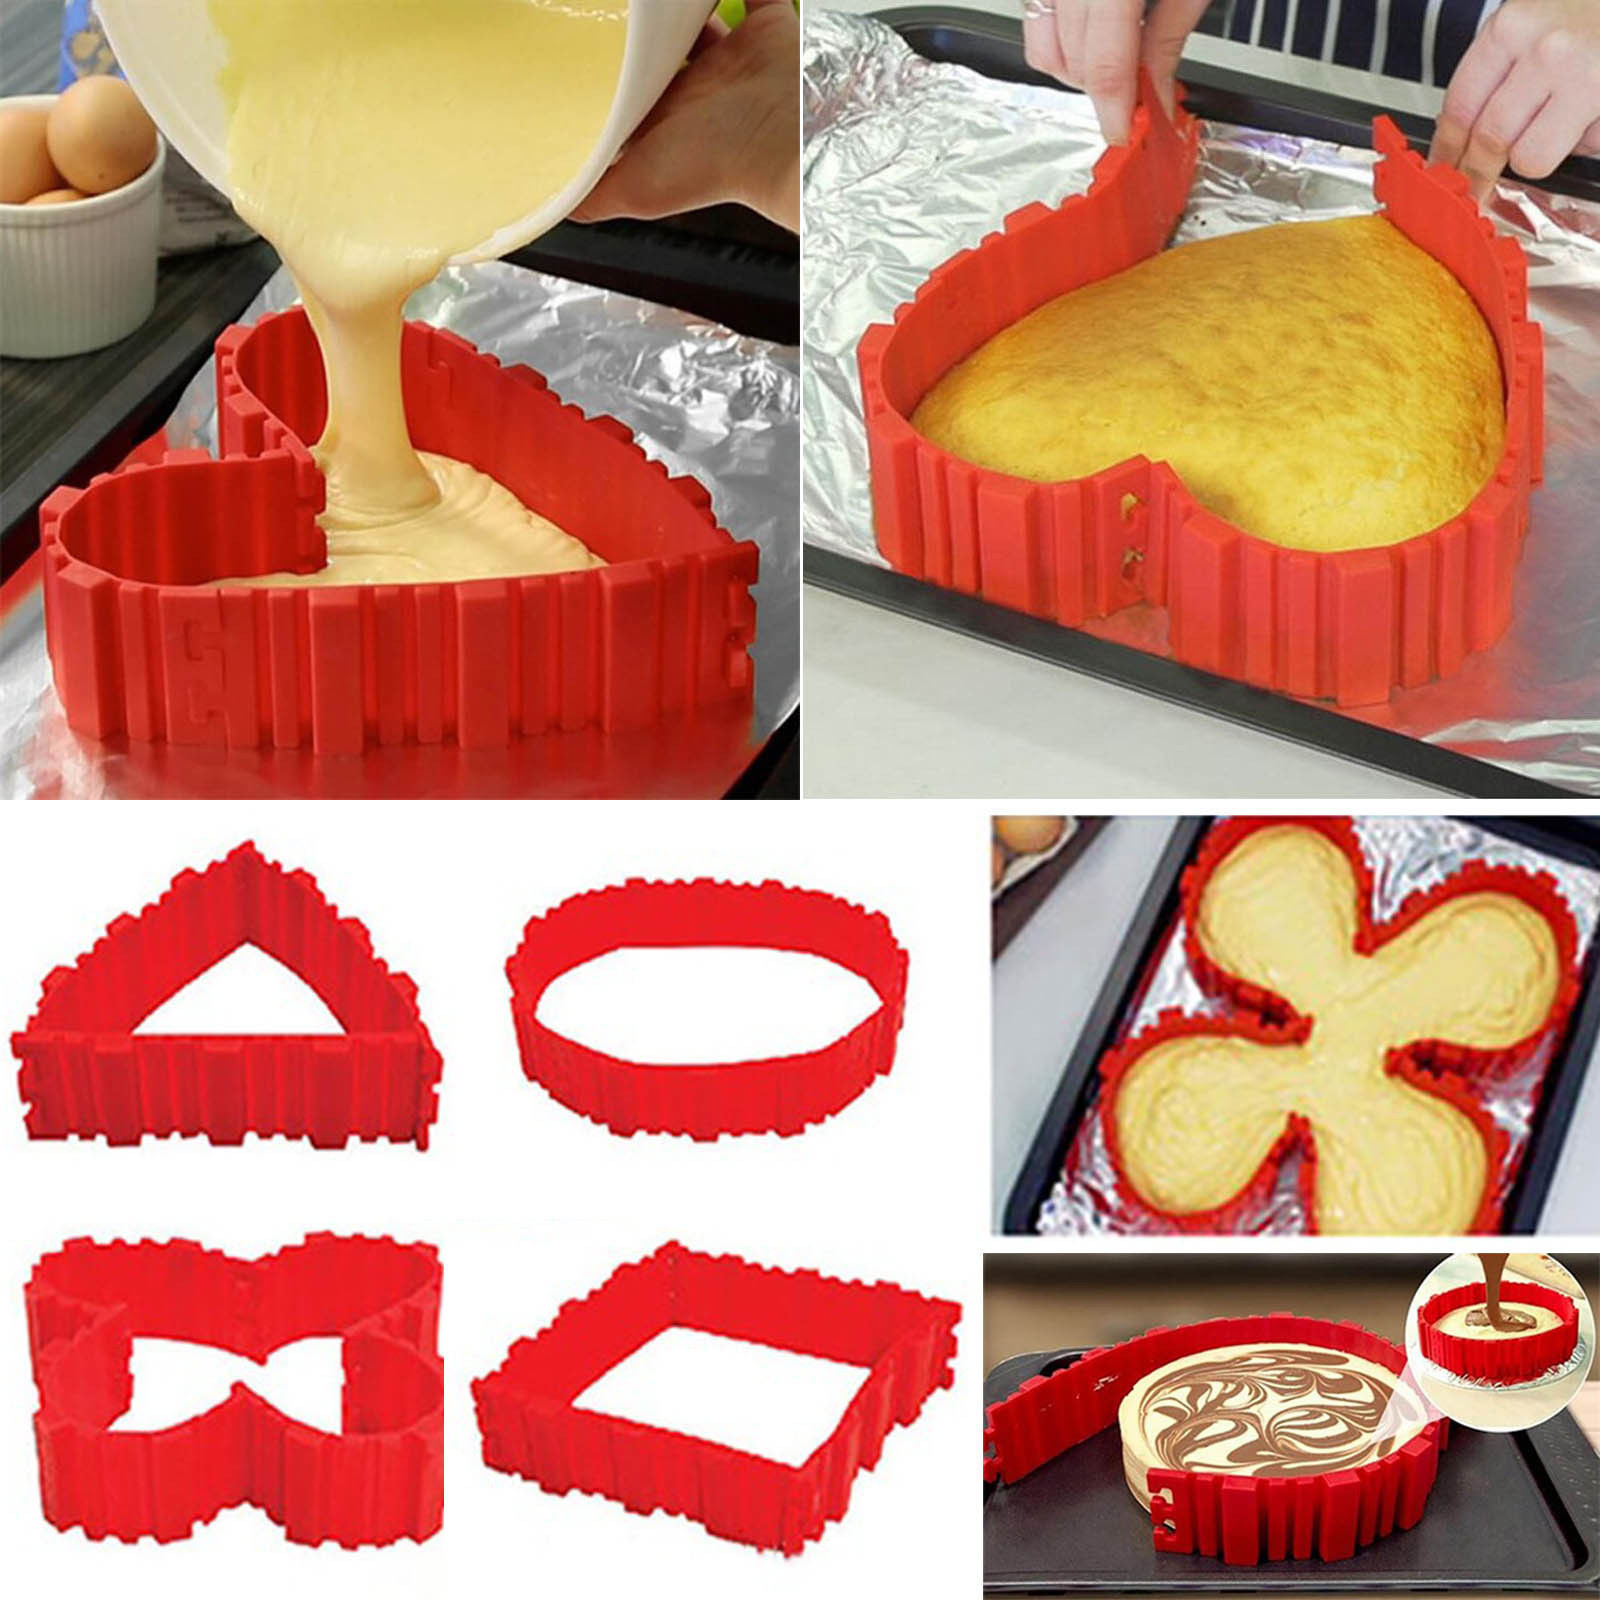 Cake Pan Non-Stick Baking Pastry Molds DIY Cake Mould Heart Shape Mold Silicone 